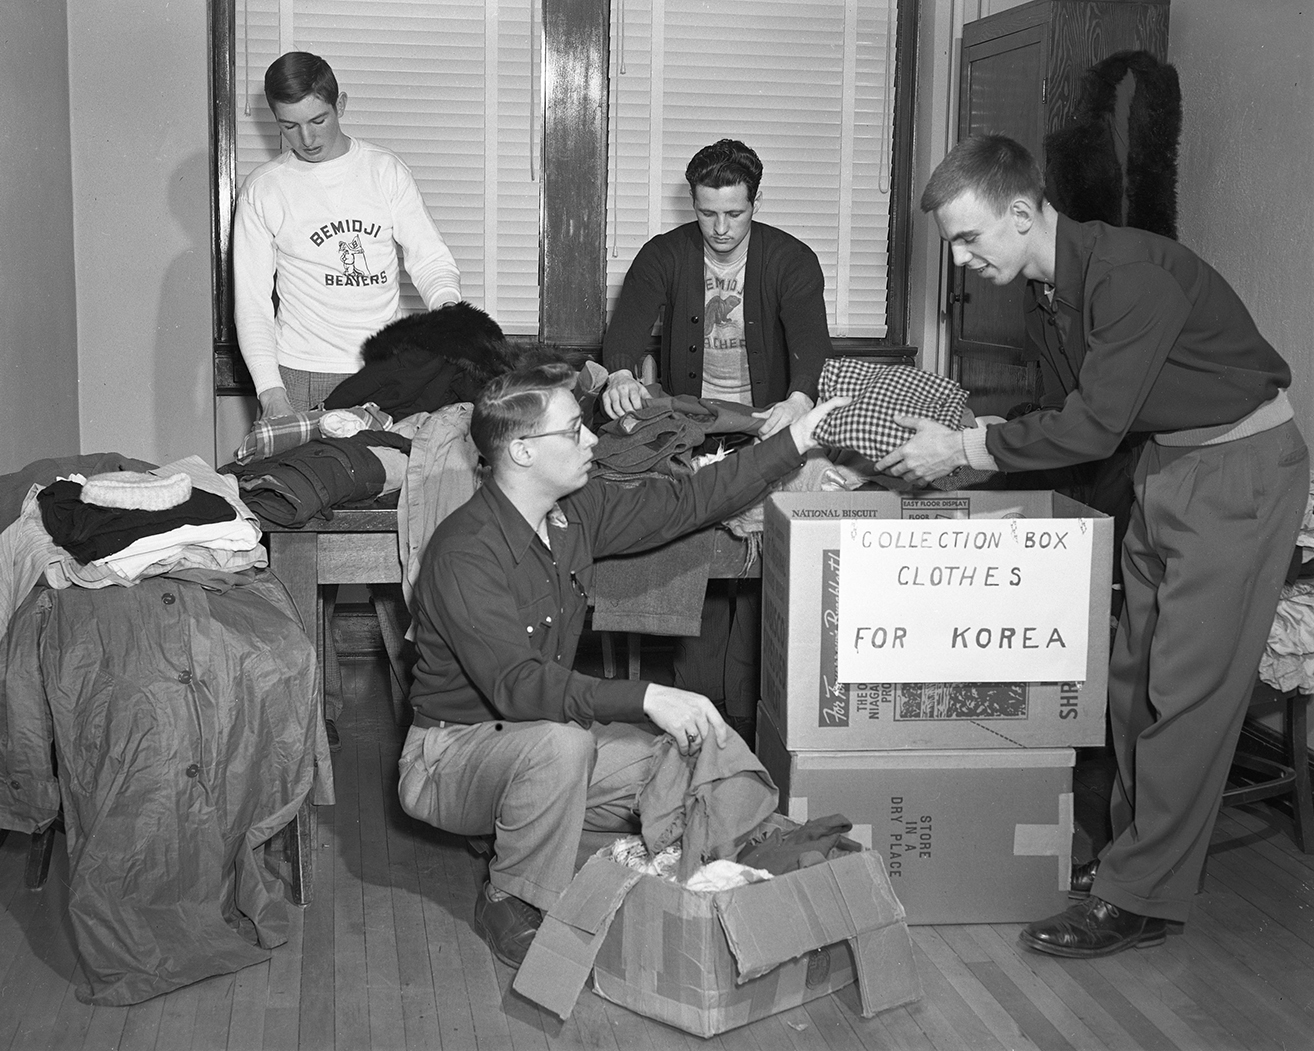 Students collect donations for Korea during the Korean War.